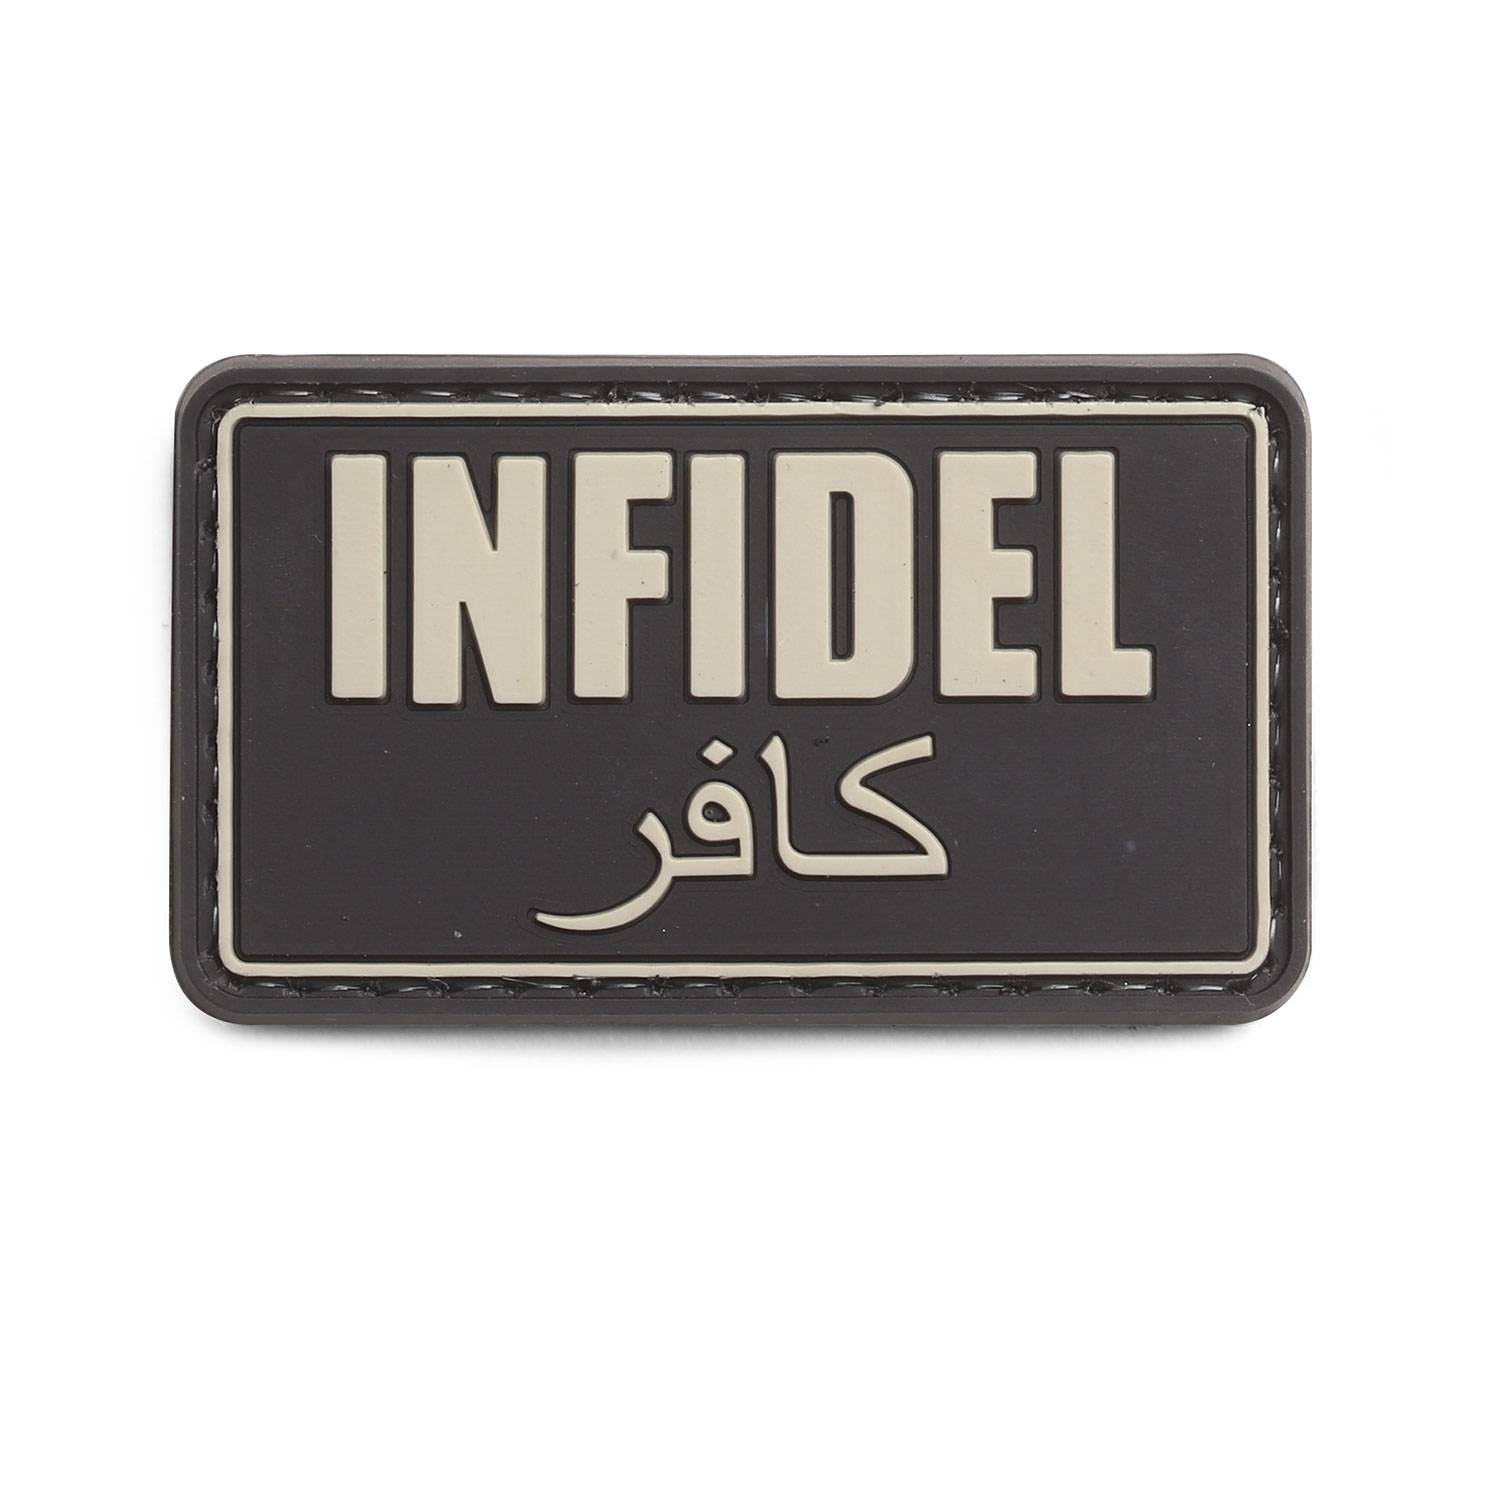 5ive Star Gear “Infidel” Morale Patch